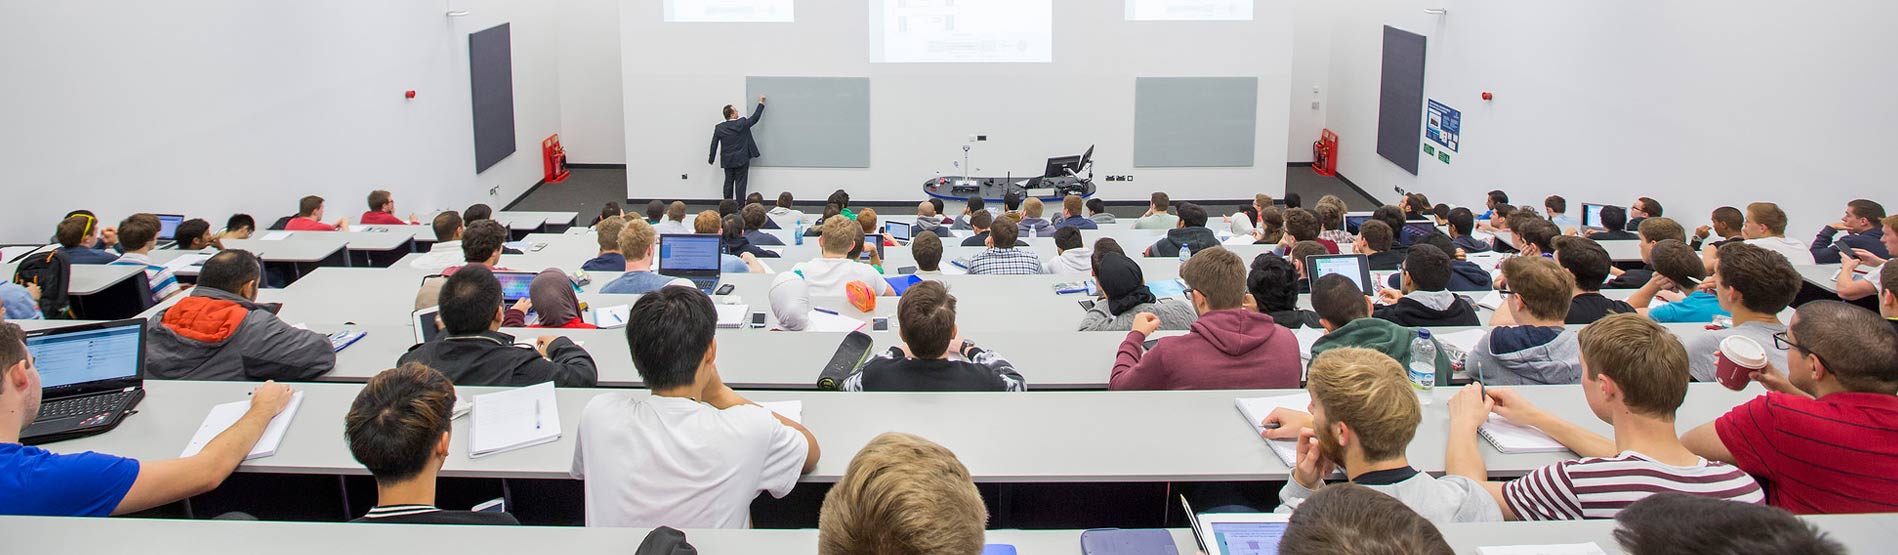 A view from the back of a lecture theatre of students sat in rows and a lecturer pointing at the board at the front of the class